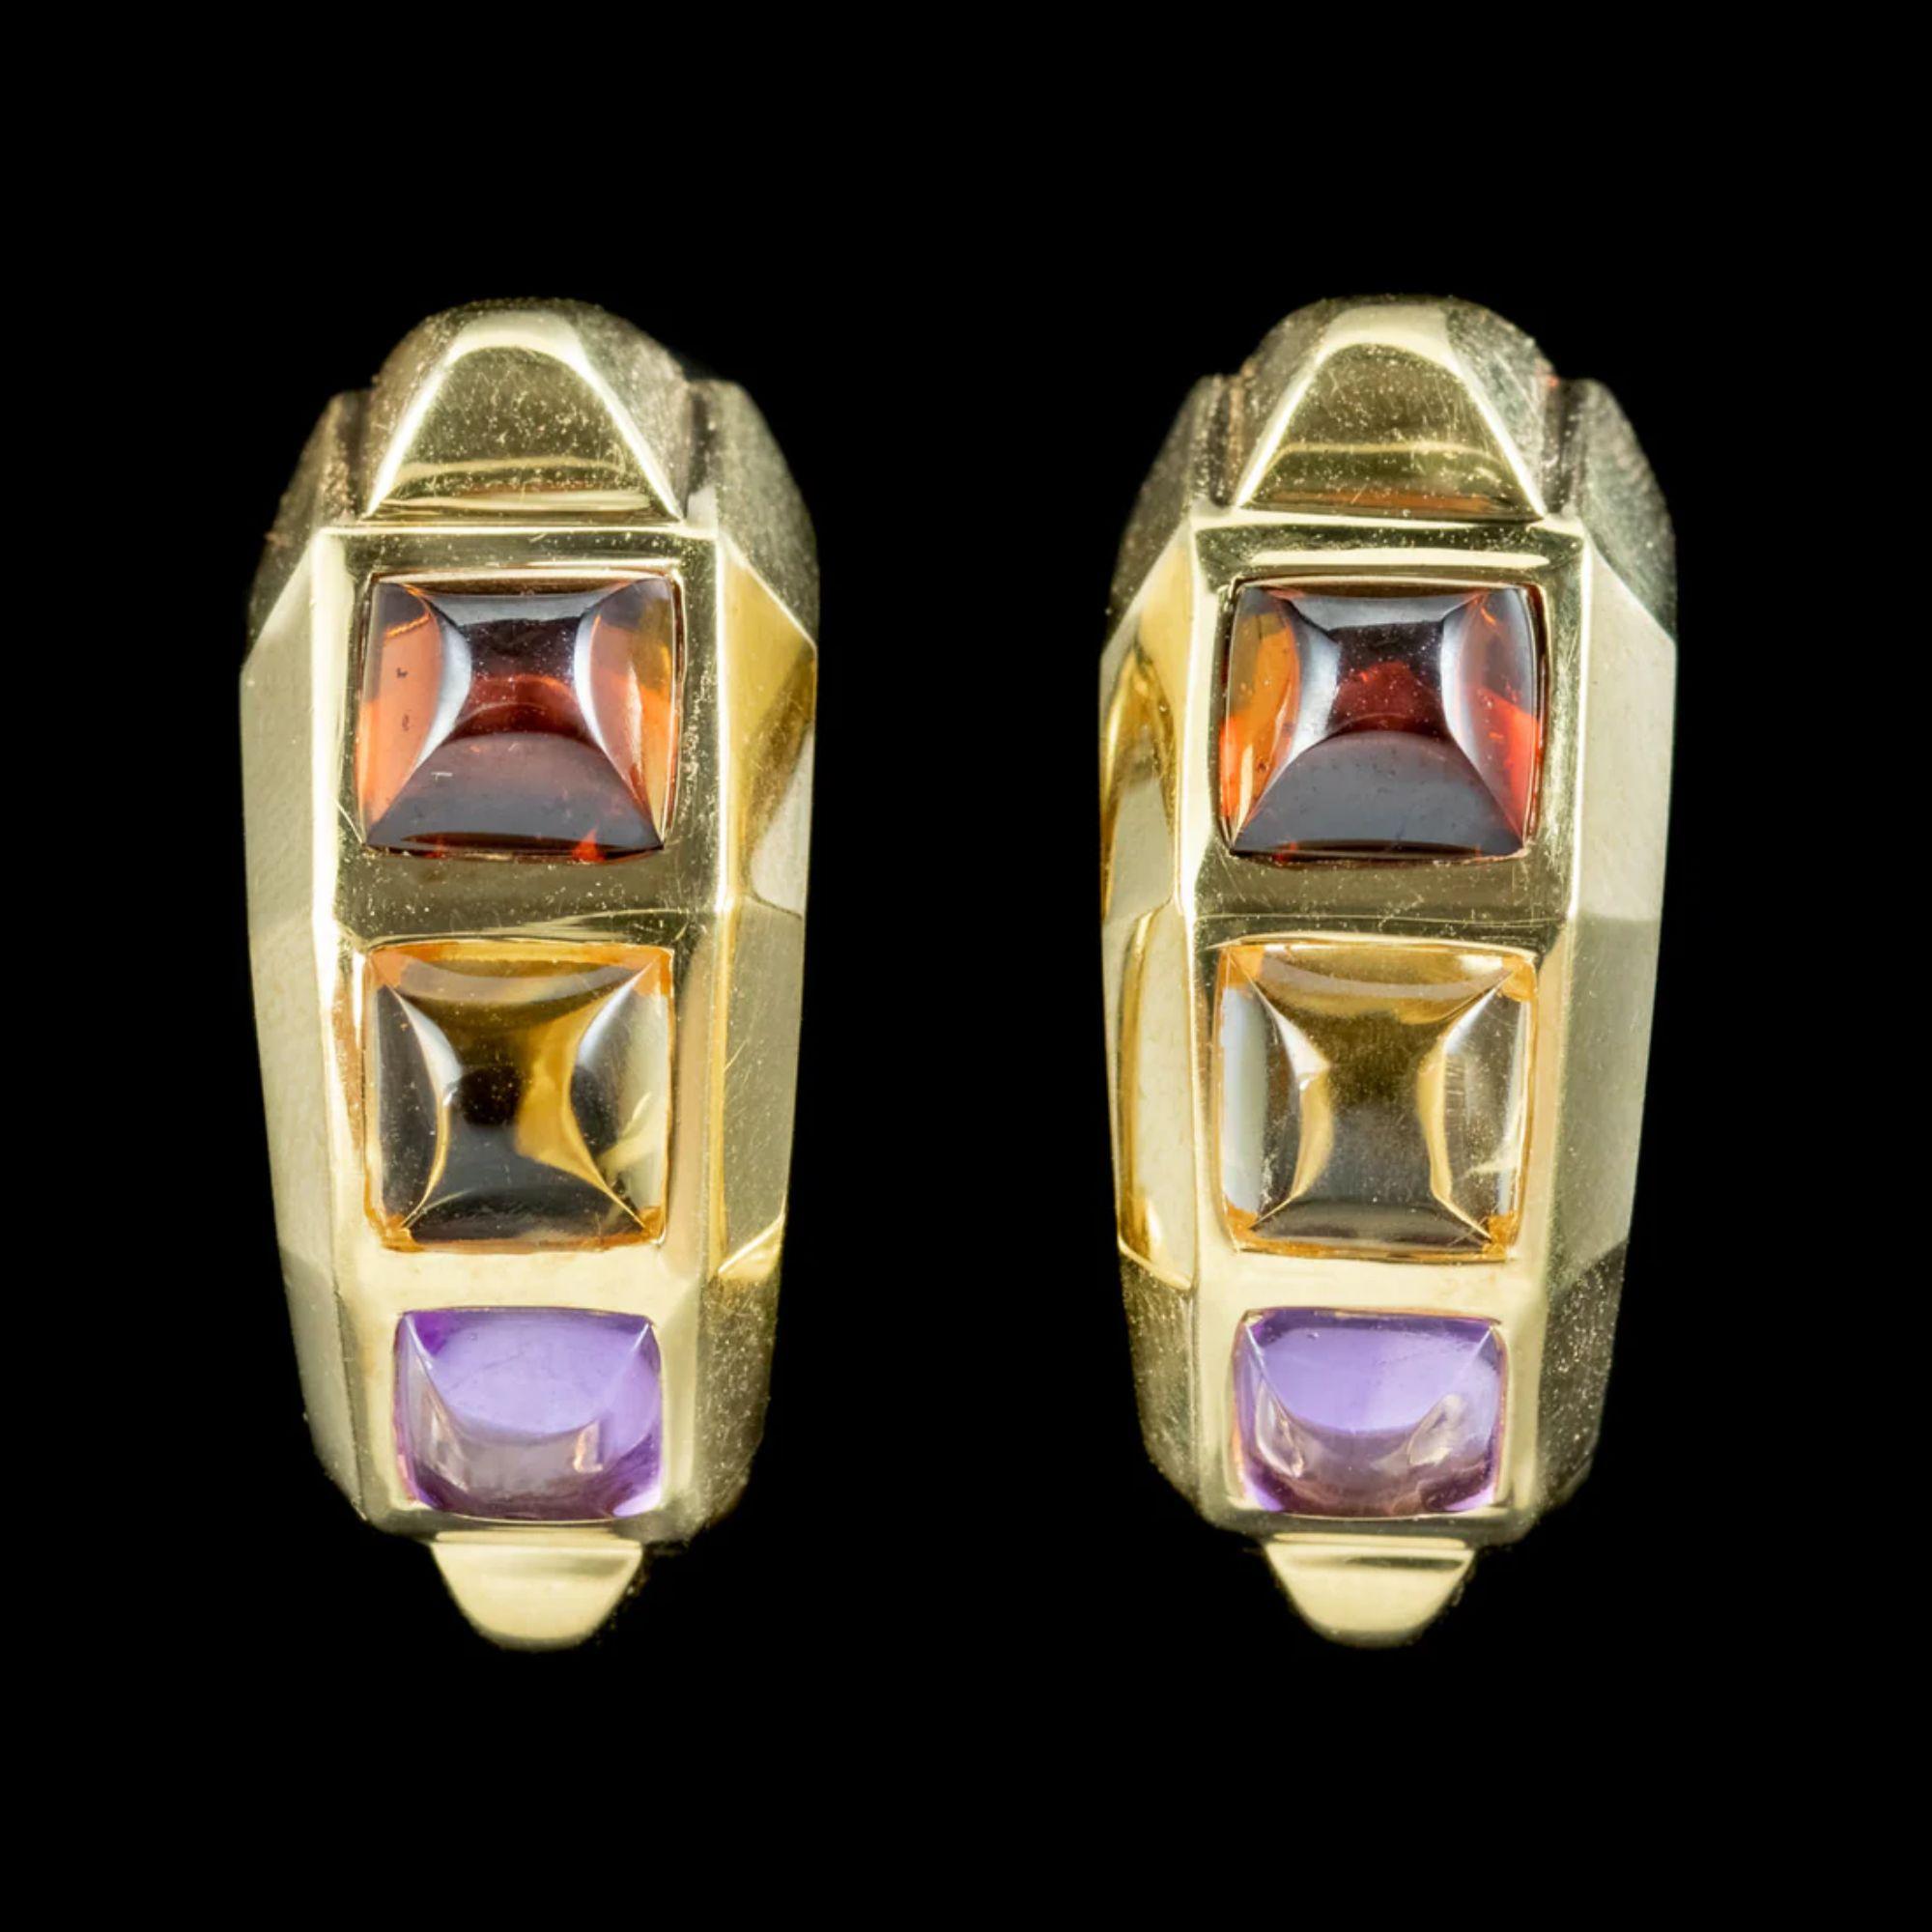 A colourful pair of vintage half hoop earrings decorated with square cabochon garnets, citrines and amethysts which are approx. 0.70ct each. 

Each earring is crafted in 18ct gold with a faceted, geometric design and secure lever back fittings at